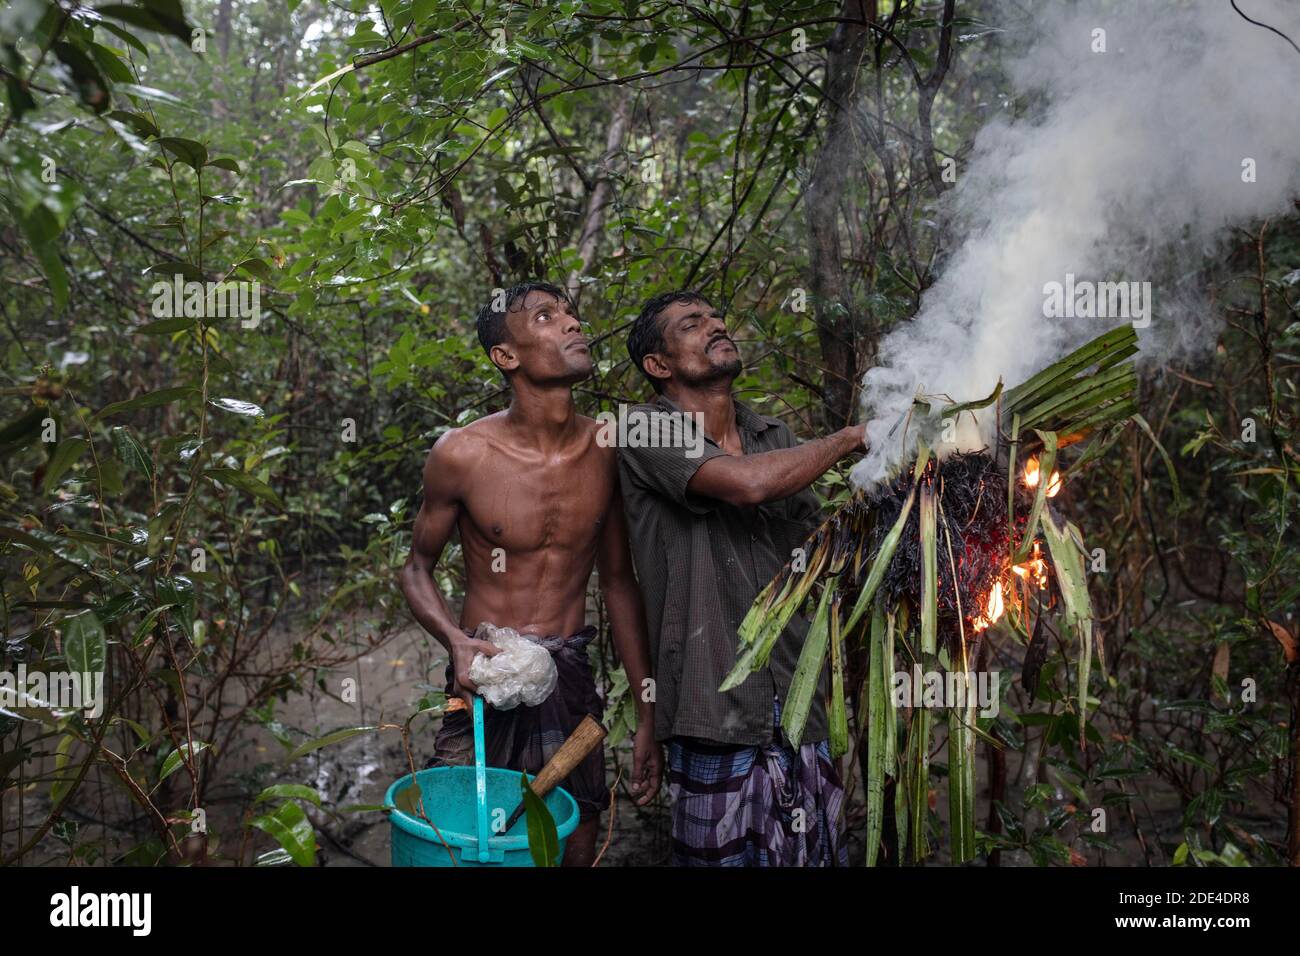 Two honey collectors after lighting damp perennials and leaves with fire accelerant to produce smoke, Mongla, Sundarbans, Bangladesh Stock Photo